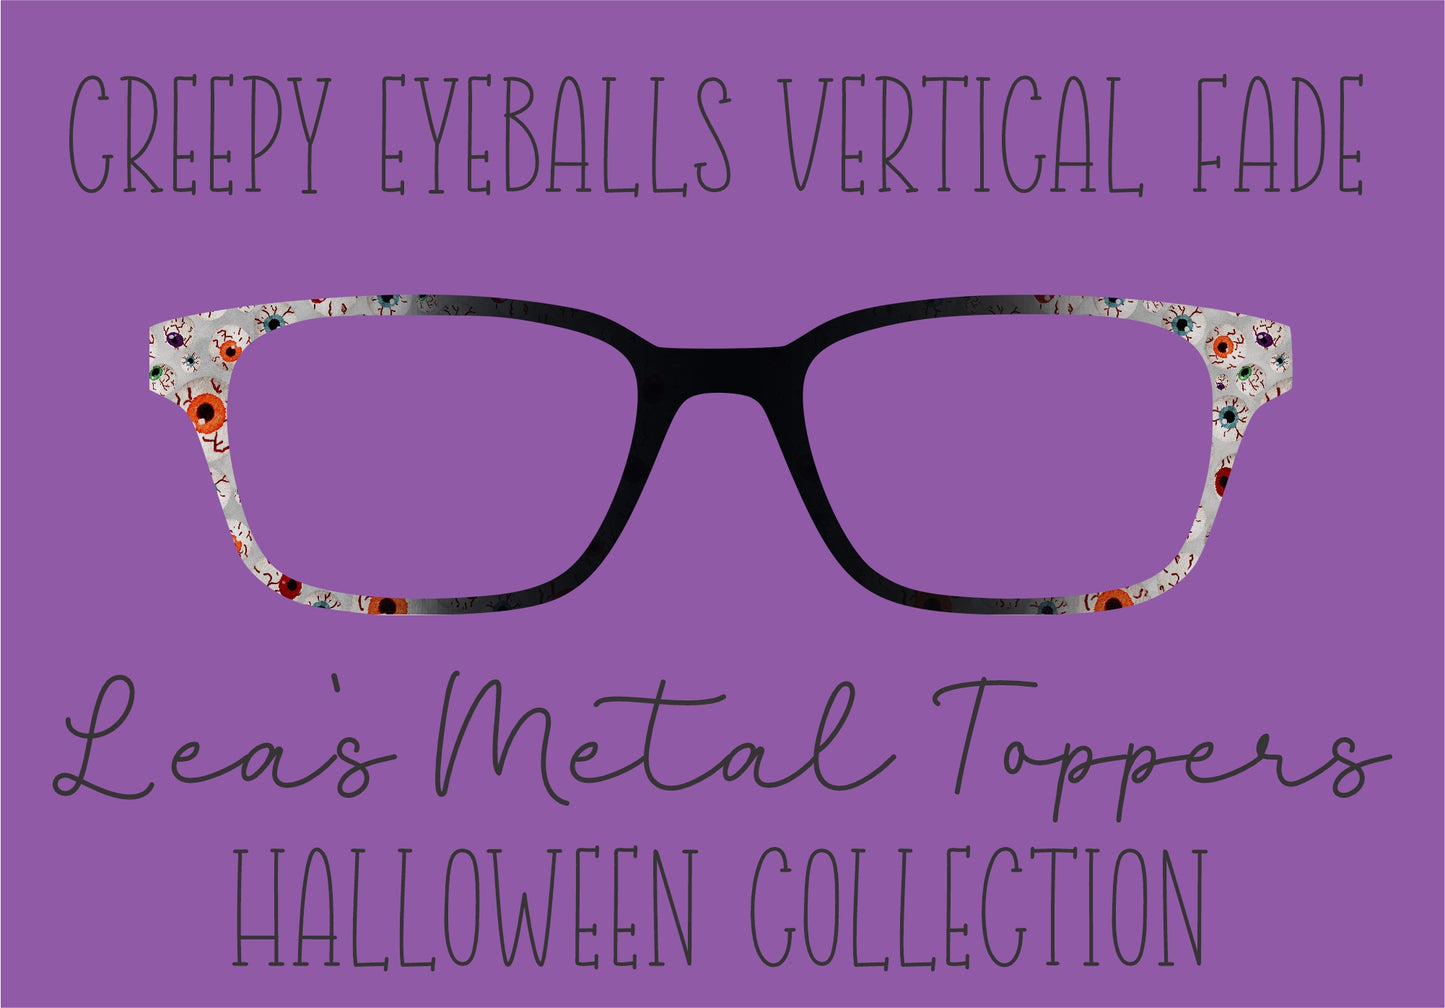 CREEPY EYEBALLS VERTICAL FADE Eyewear Frame Toppers COMES WITH MAGNETS